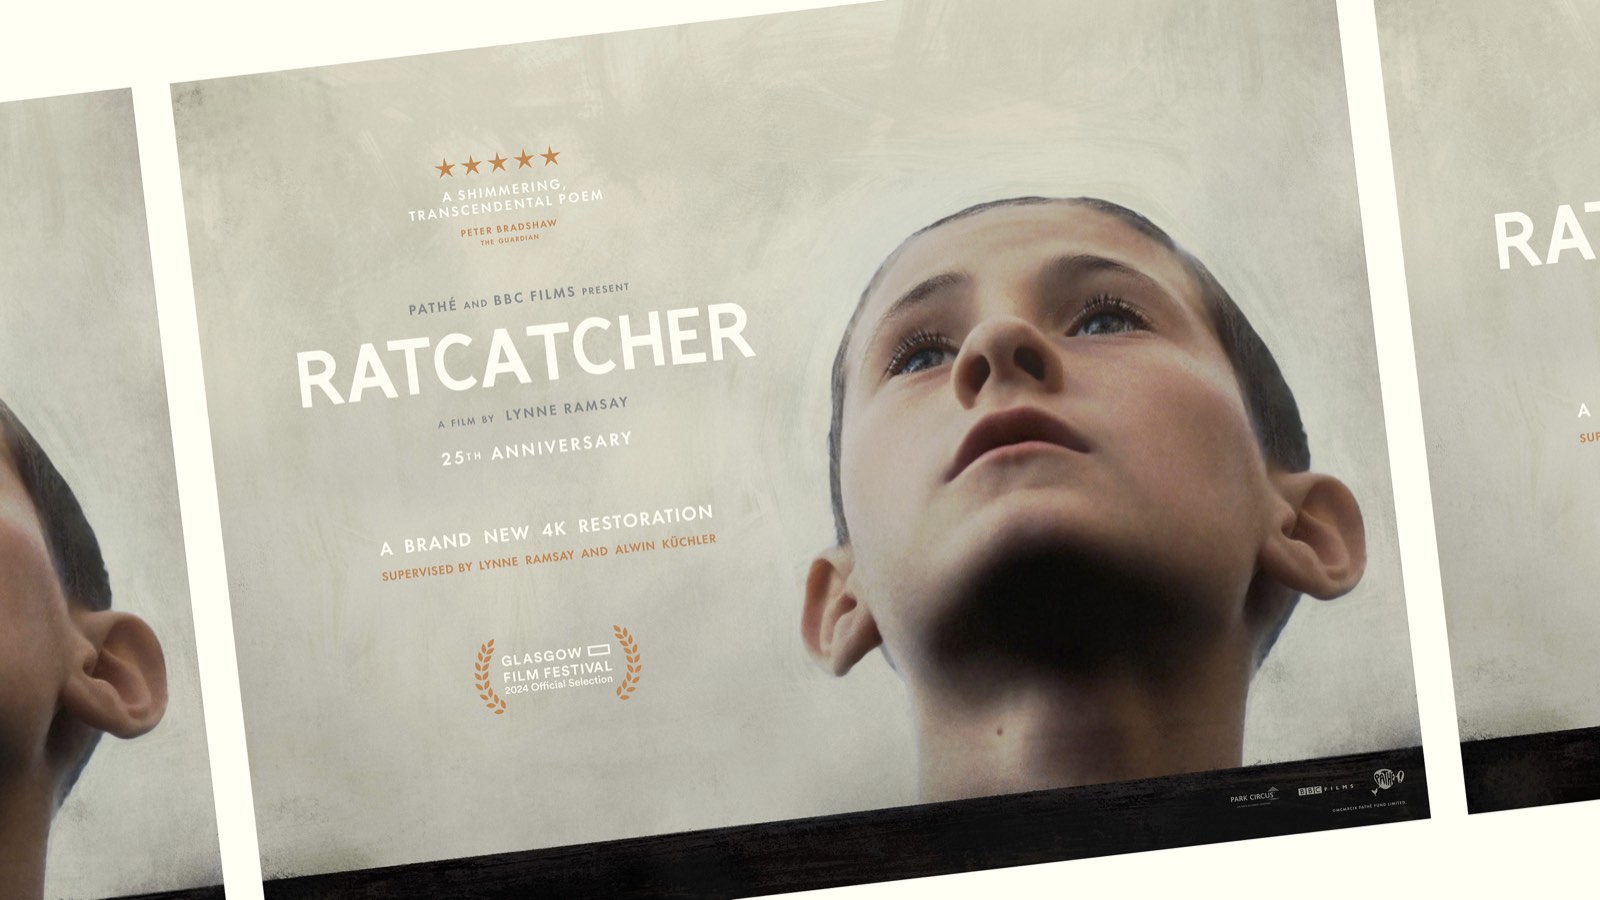 Brand new poster and 4K trailer for Ratcatcher's 25 anniversary